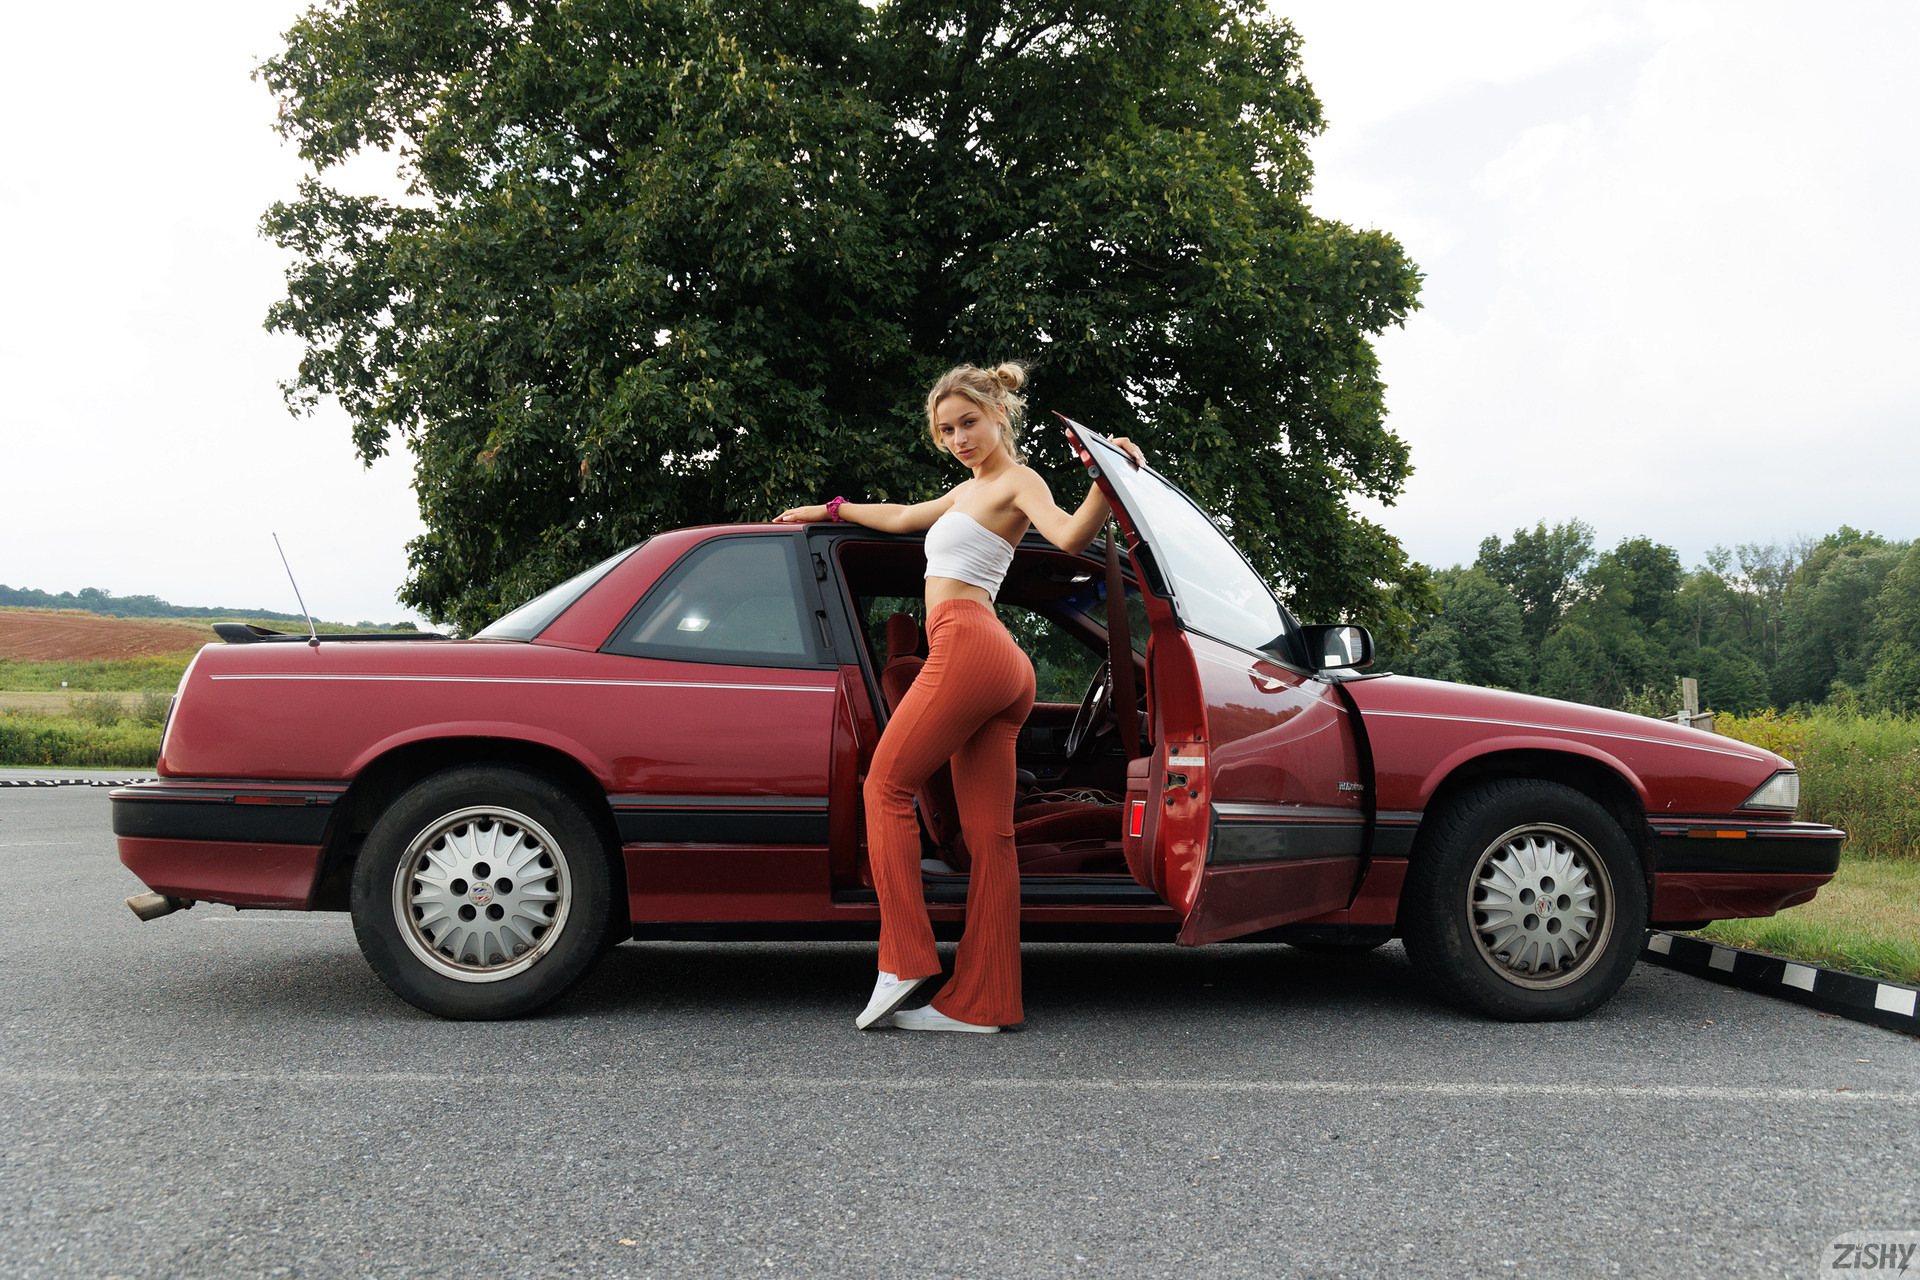 People 1920x1280 Jezebel Madd blonde Zishy women model crop top ass looking at viewer standing women outdoors women with cars curvy car no bra white sneakers Vans (Company)